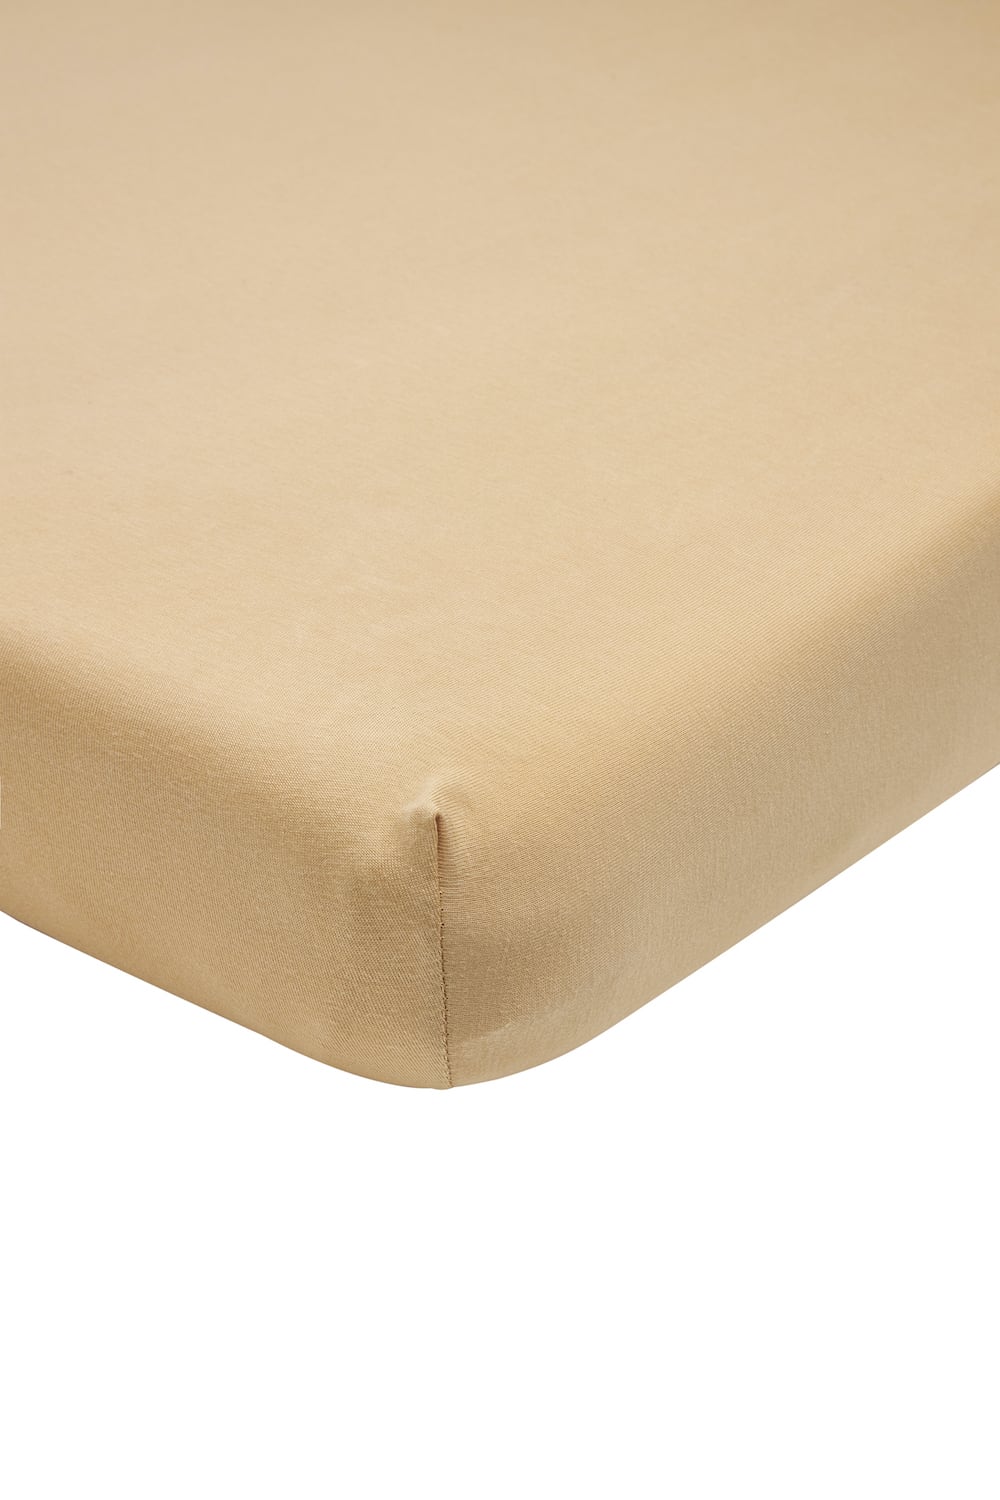 Hoeslaken 1-persoons Basic Jersey Warm Sand (120x200cm)